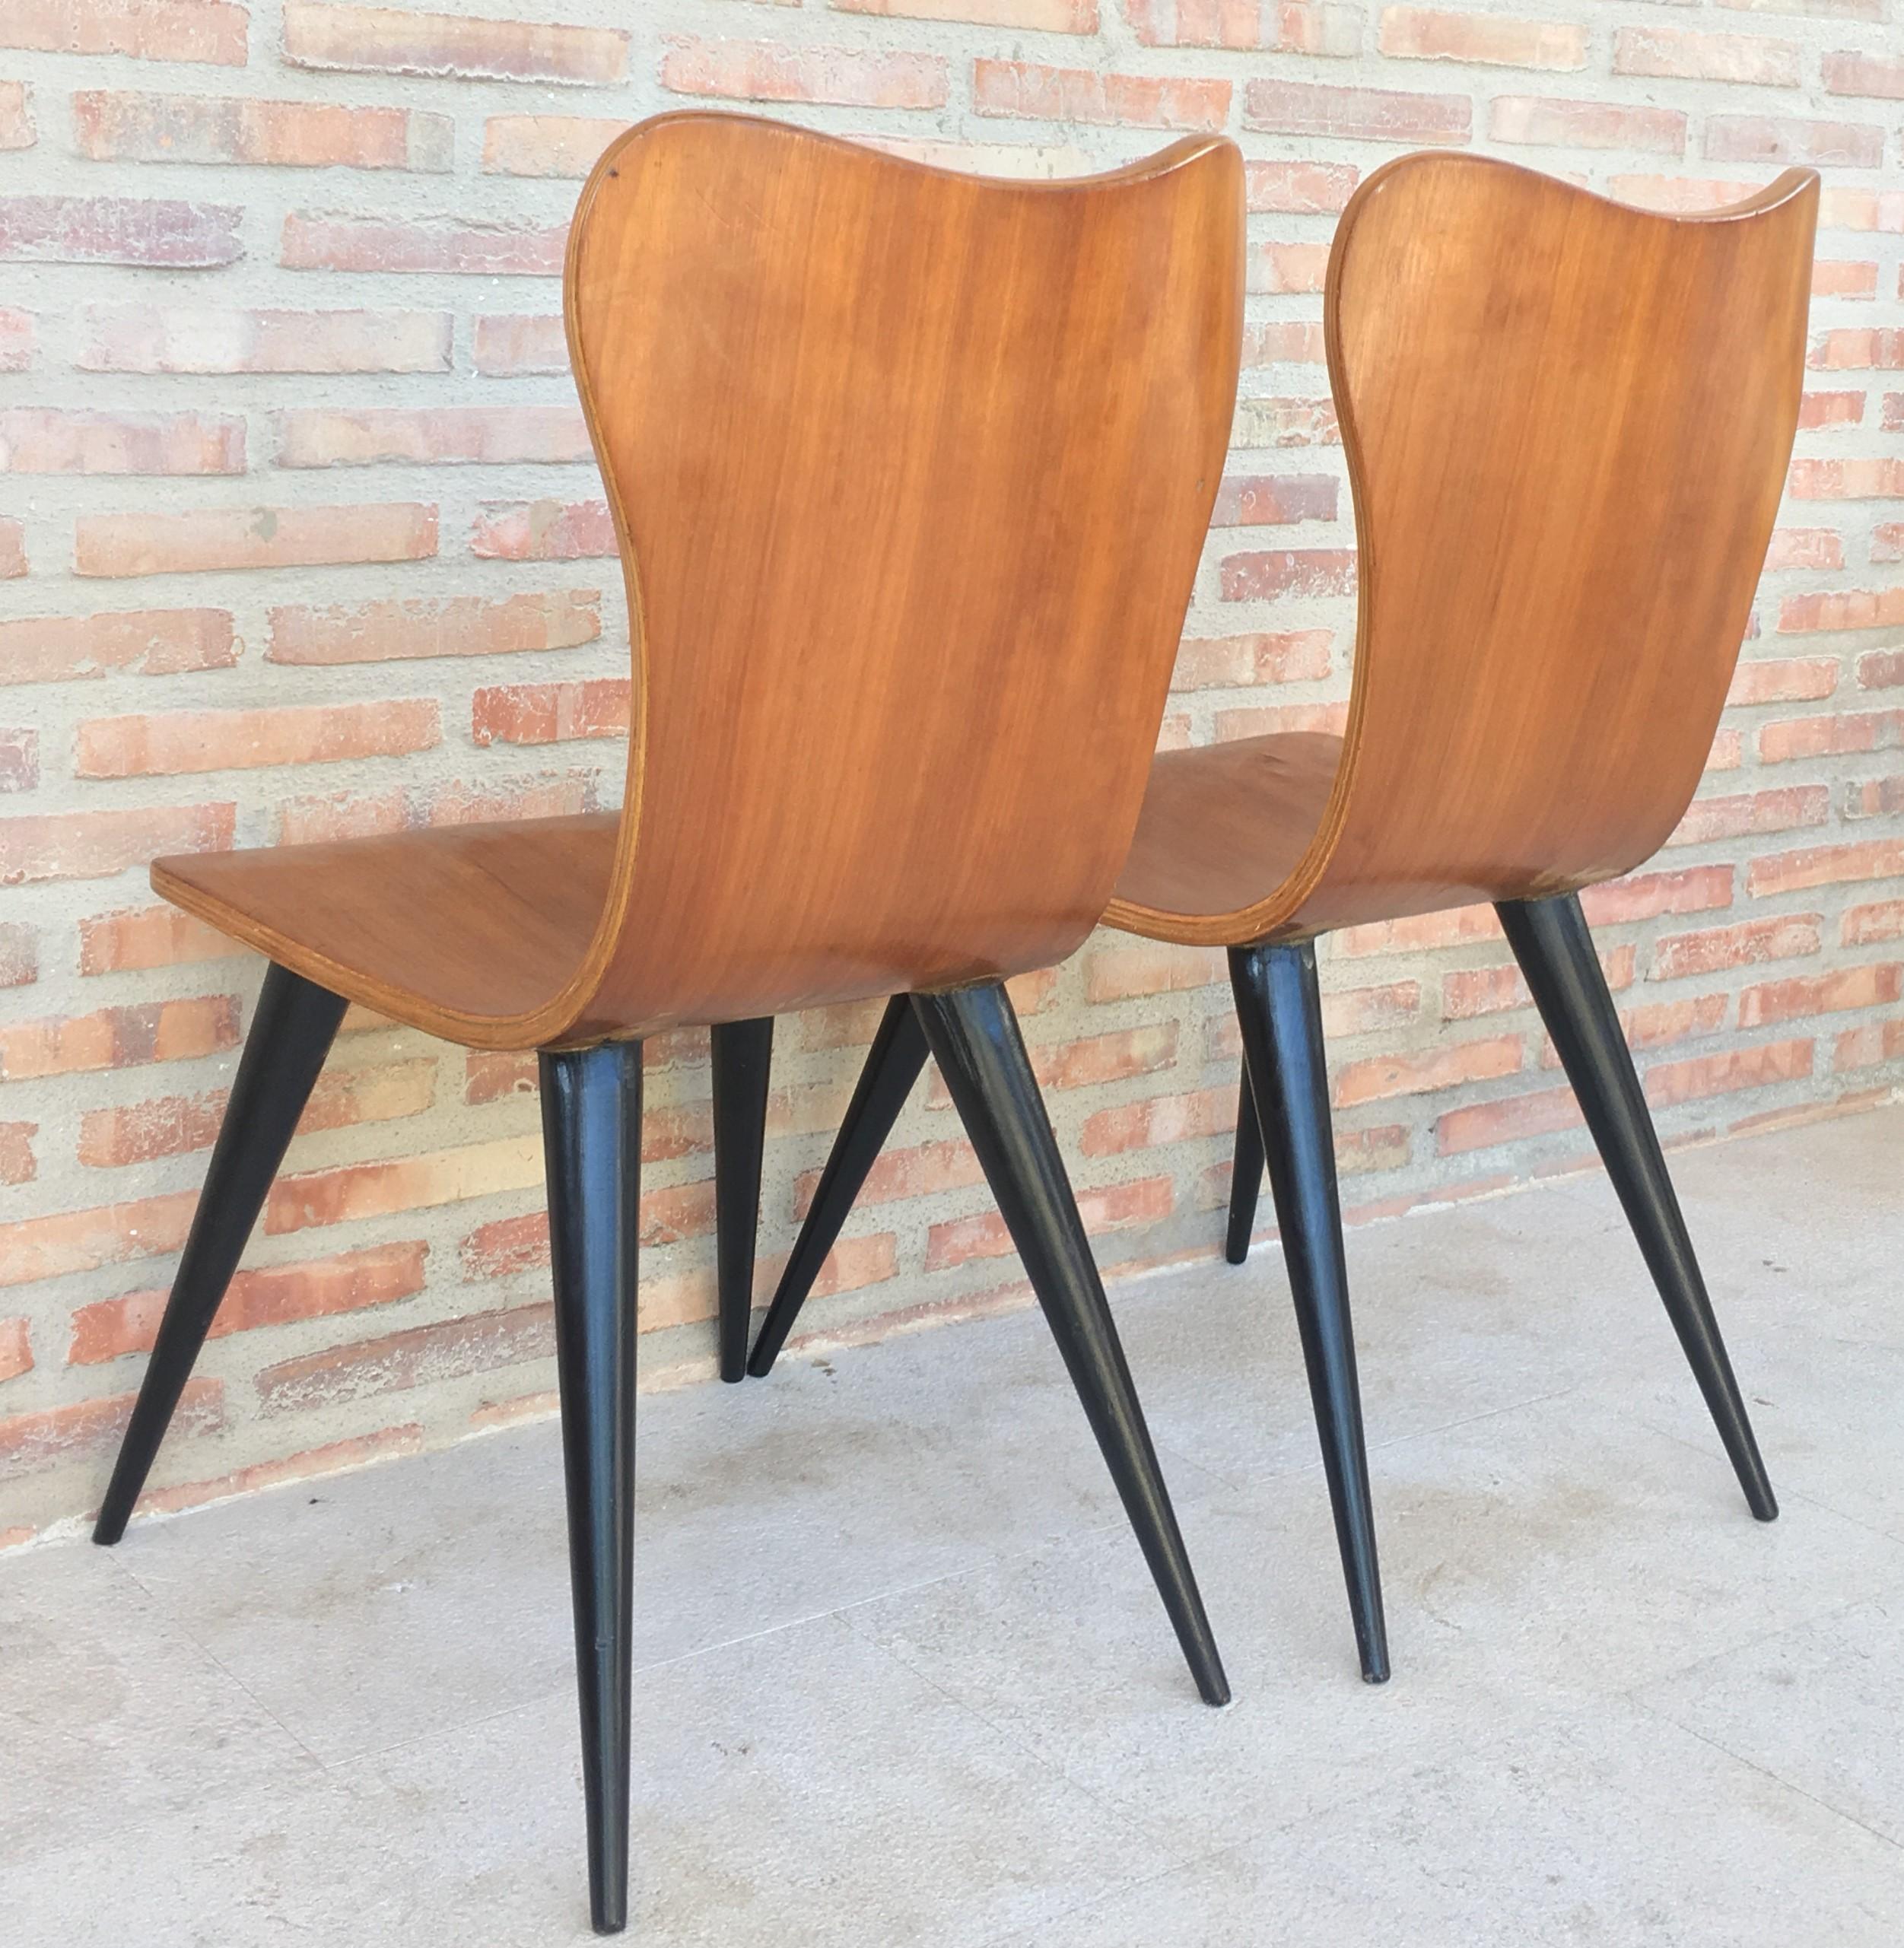 Scandinavian Modern Pair of Midcentury Arne Jacobsen Style Chairs with Black Tapered Legs For Sale